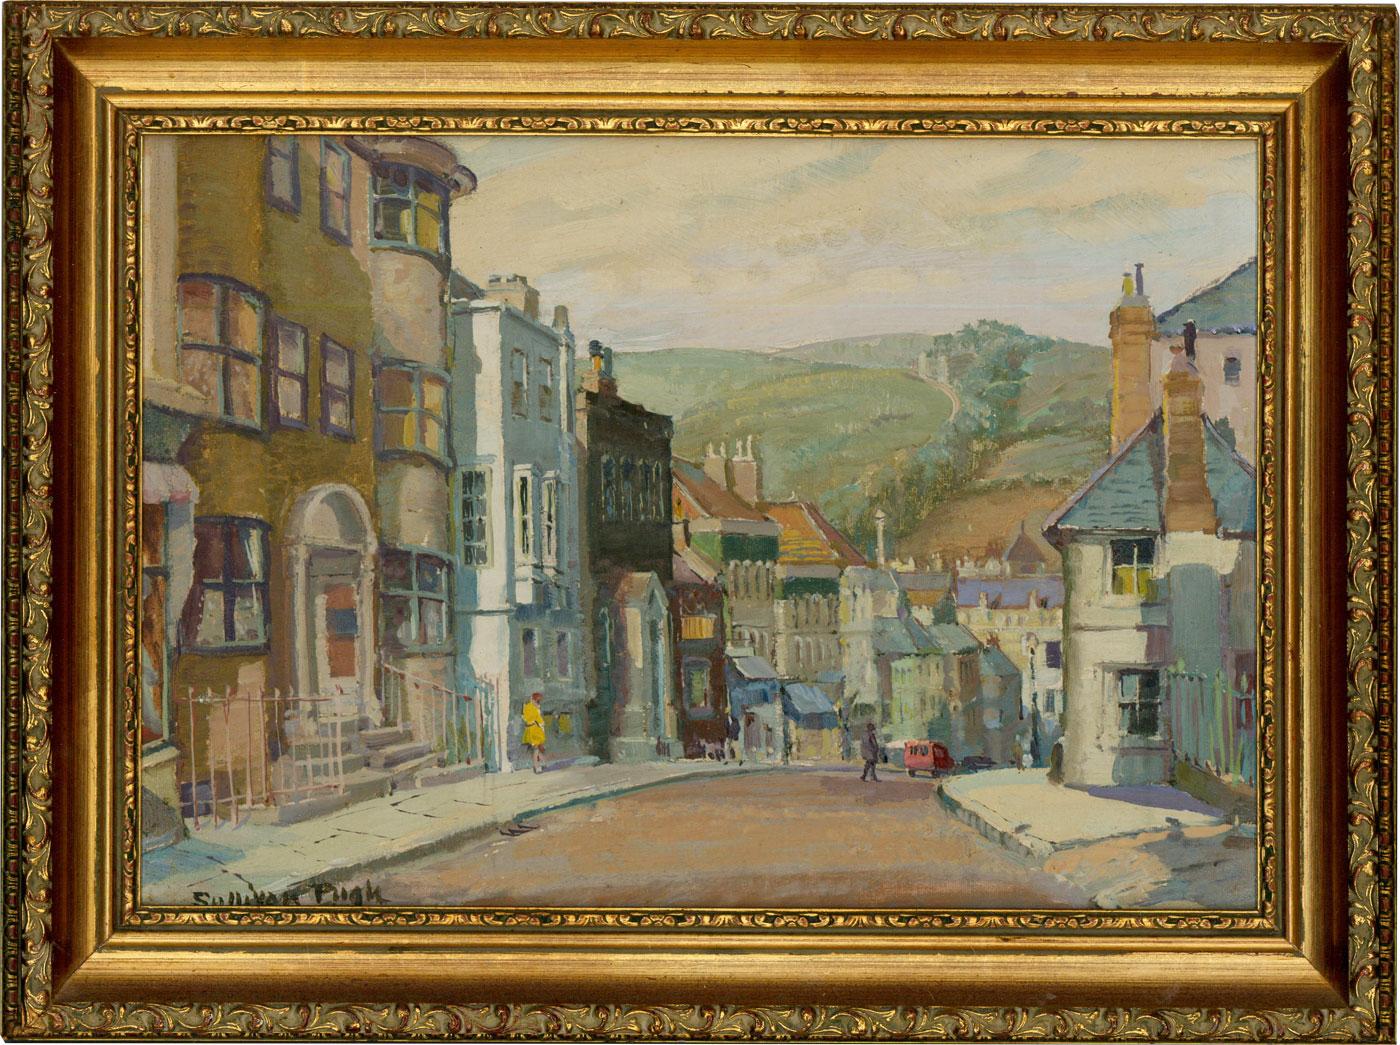 Unknown Landscape Painting - Norbert Sullivan Pugh - Framed 20th Century Oil, Lewes High Street